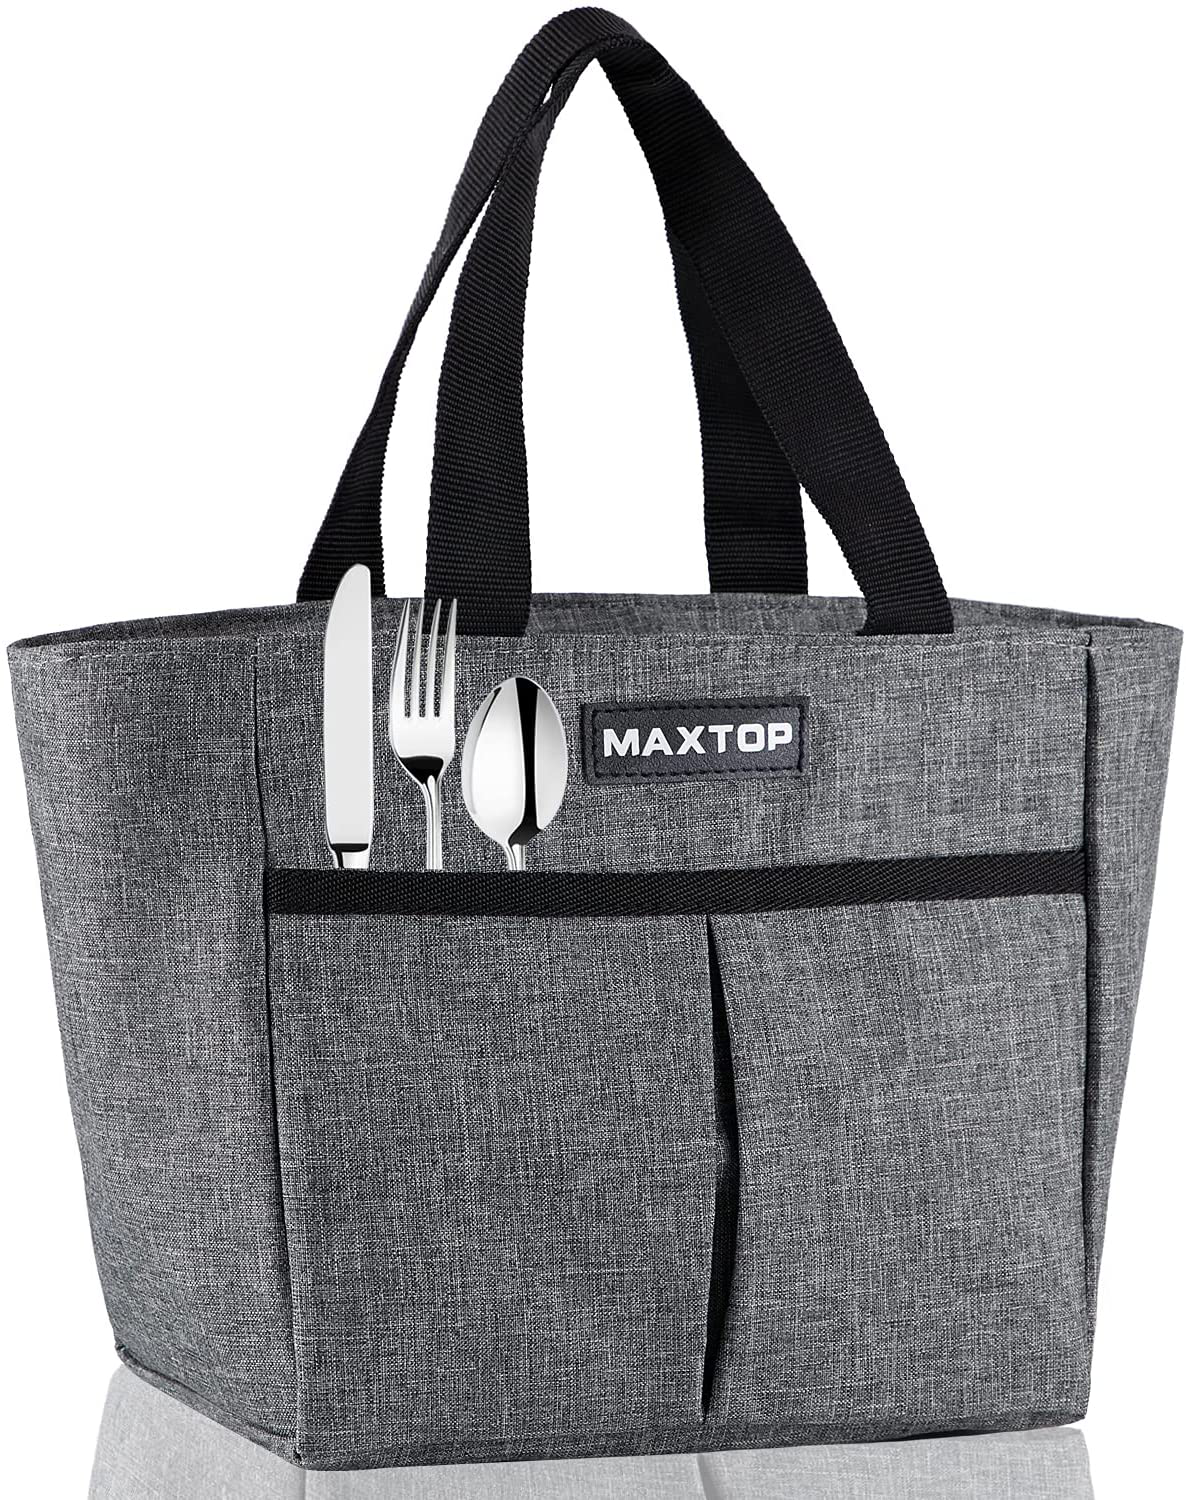 MAXTOP Lunch Bags for Women,Insulated Thermal Lunch Tote Bag,Lunch Box with Front Pocket for Office Work Picnic Shopping (Light Grey, Large)